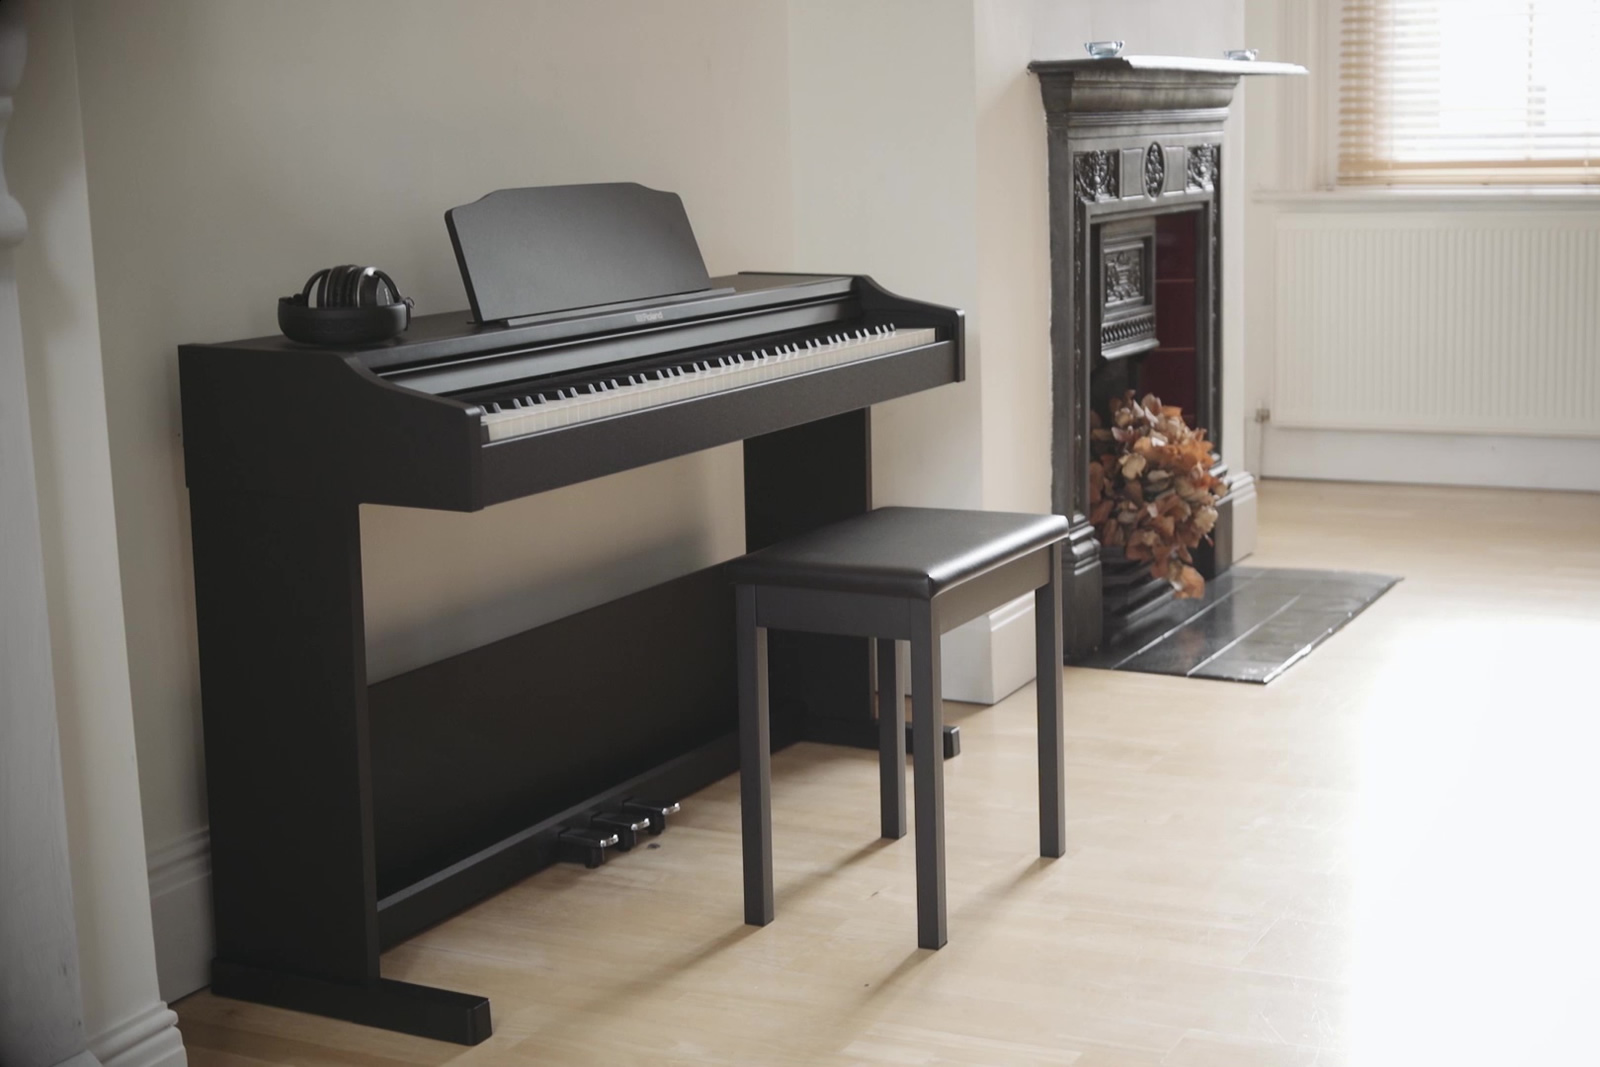 Digital Piano Review: Unbiased Analysis and Recommendations